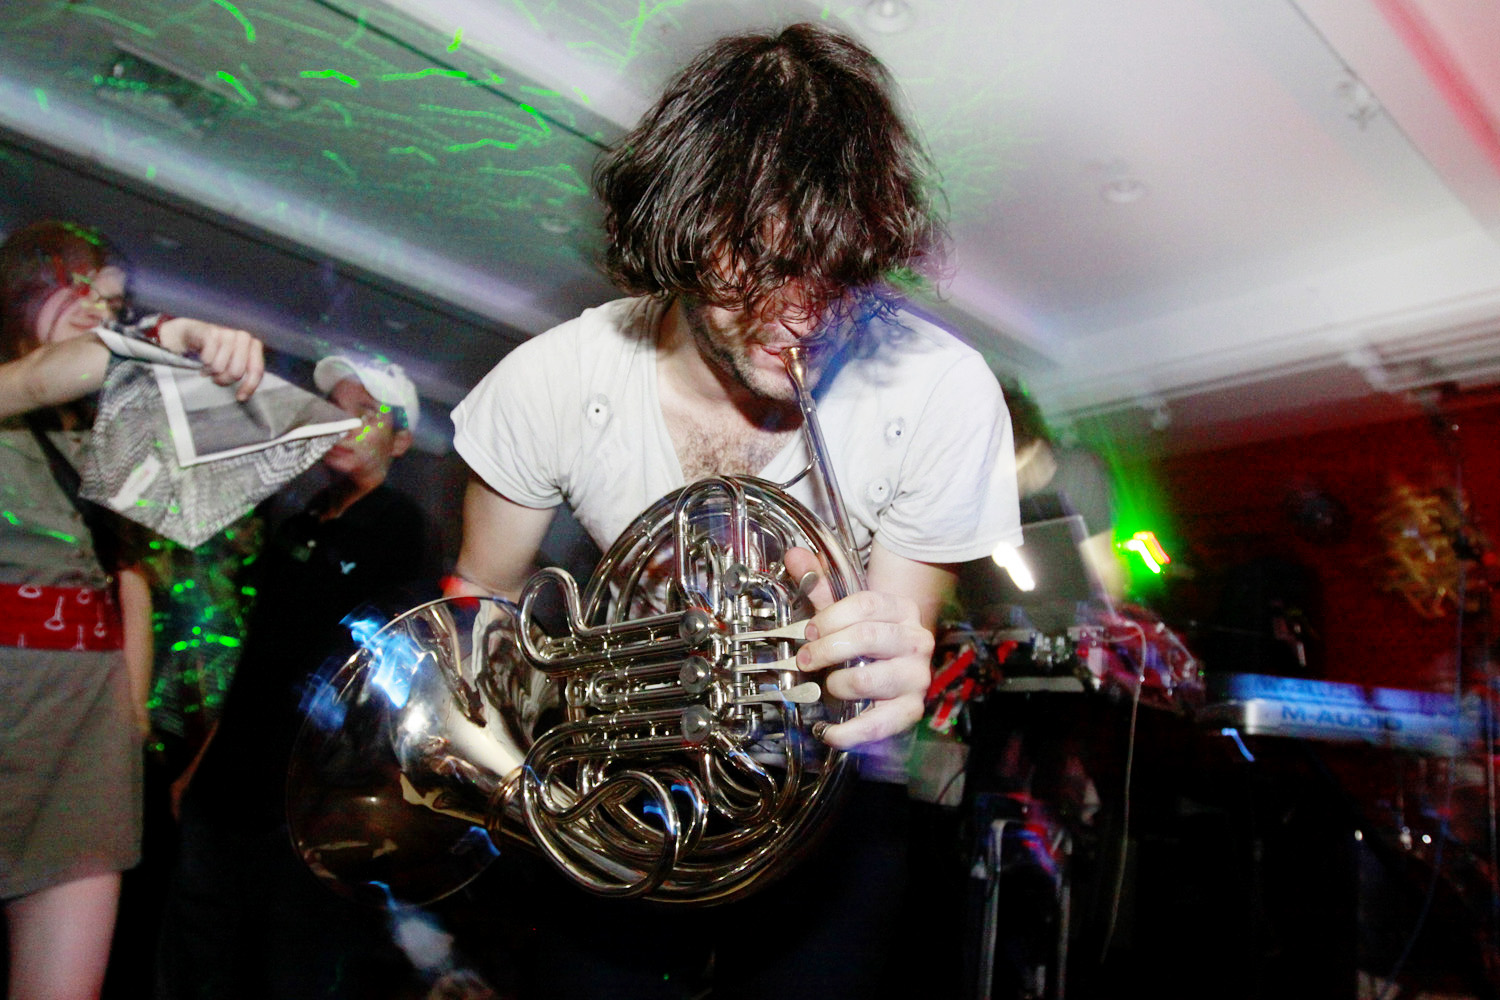 French Horn Rebellion @ 88 Palace on October 22, 2009